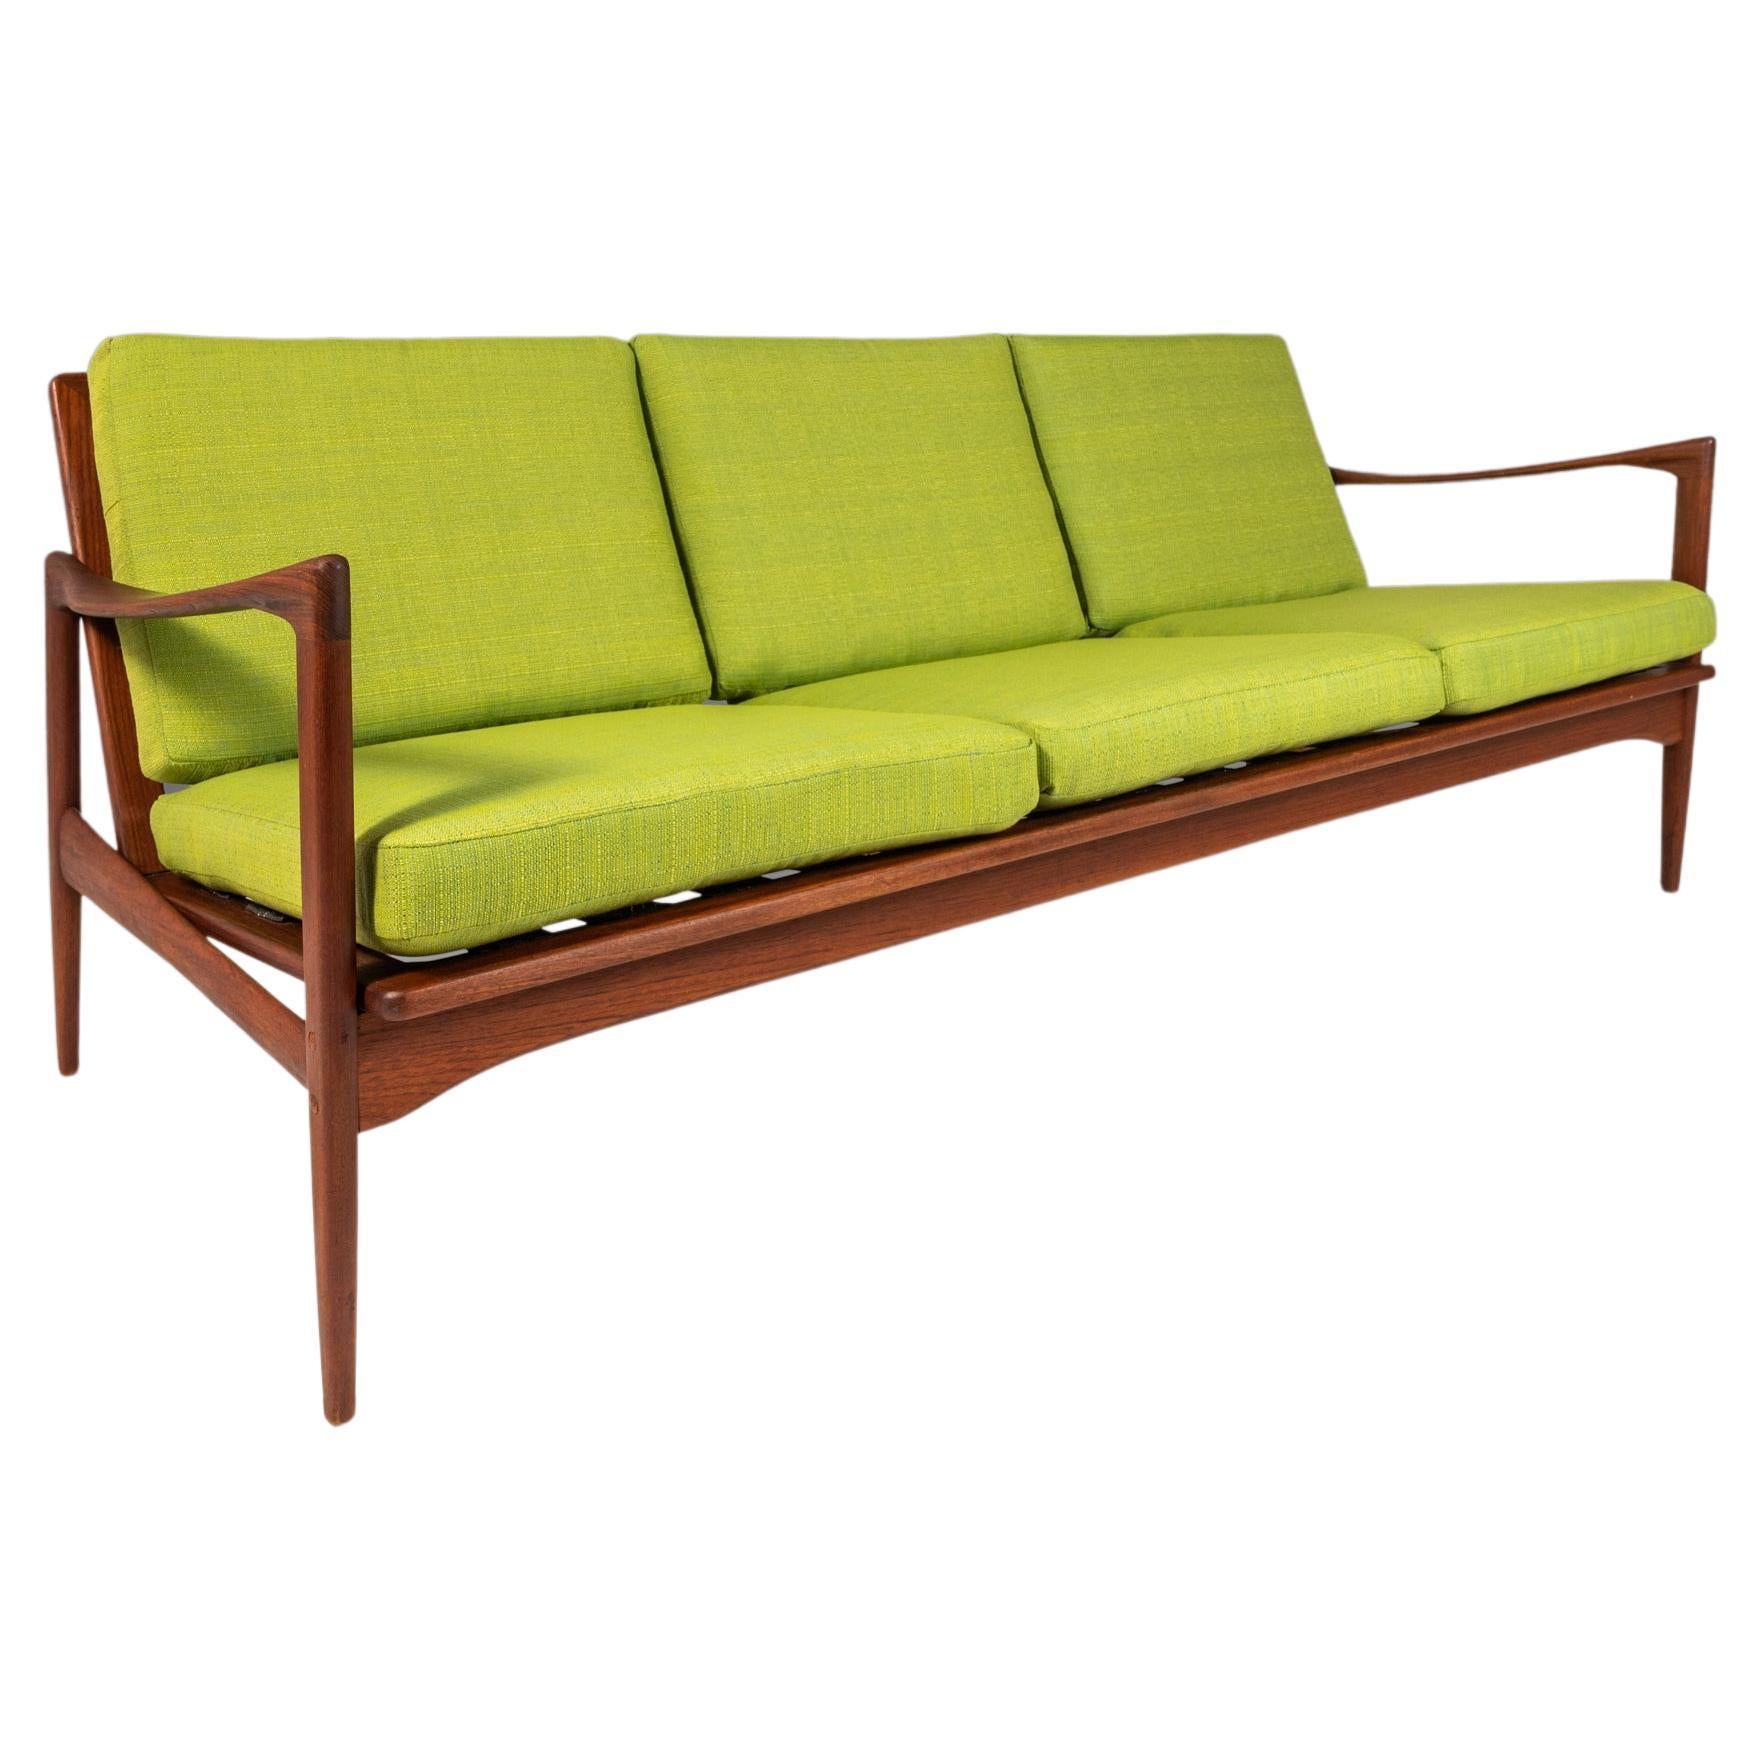 Kandidaten 3 Seat Sofa by Ib Kofod-Larsen for Olof Persons 'OPE', Sweden, 1960s